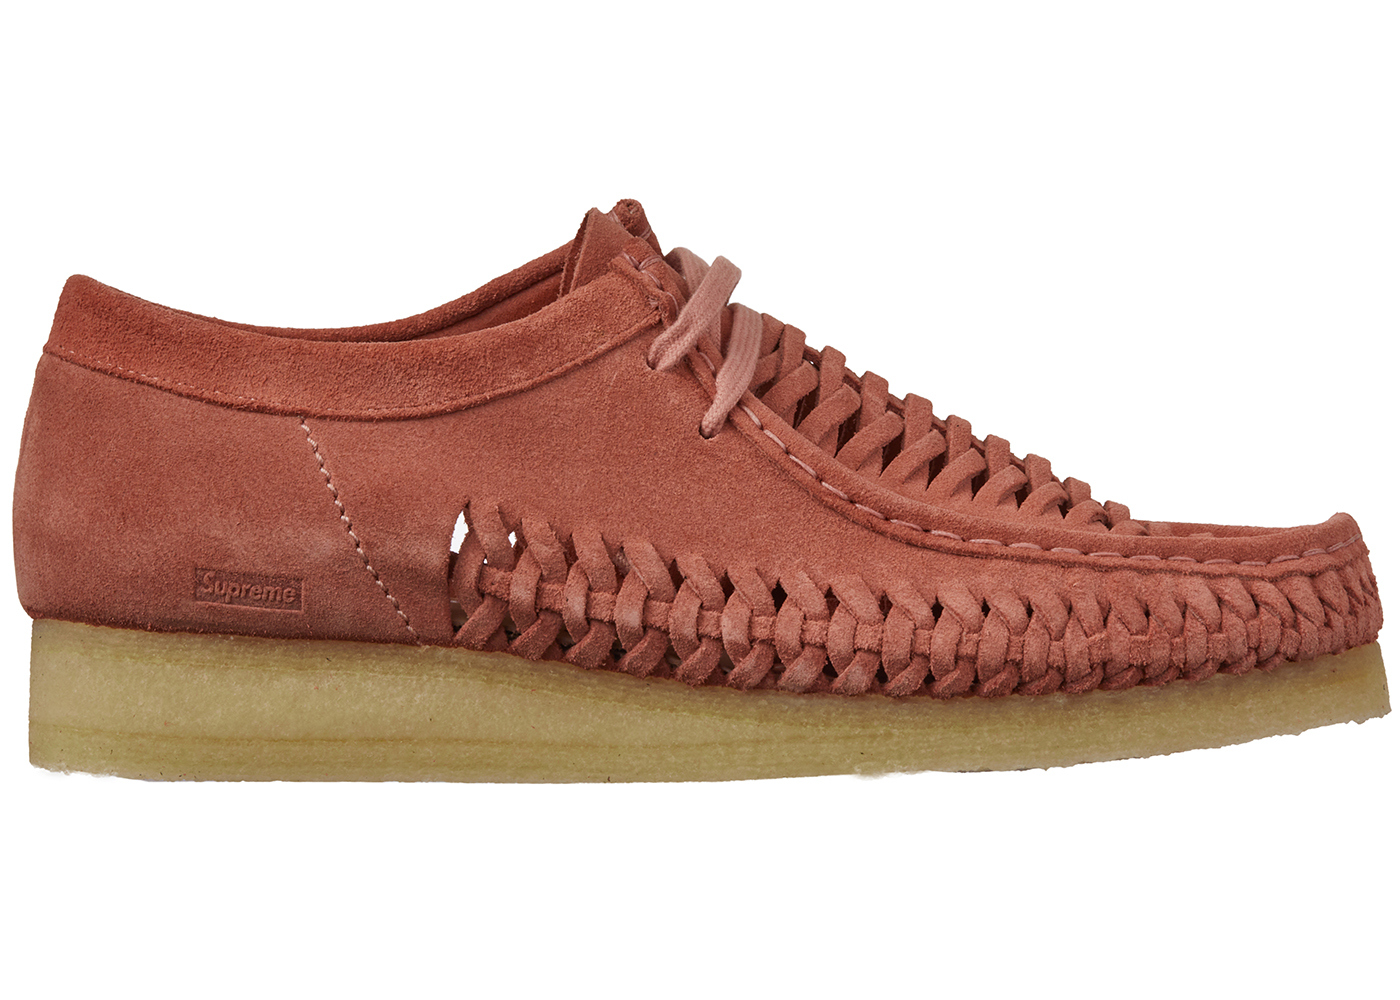 Supreme Clarks Originals Woven Wallabee: Supreme Pick of the Week